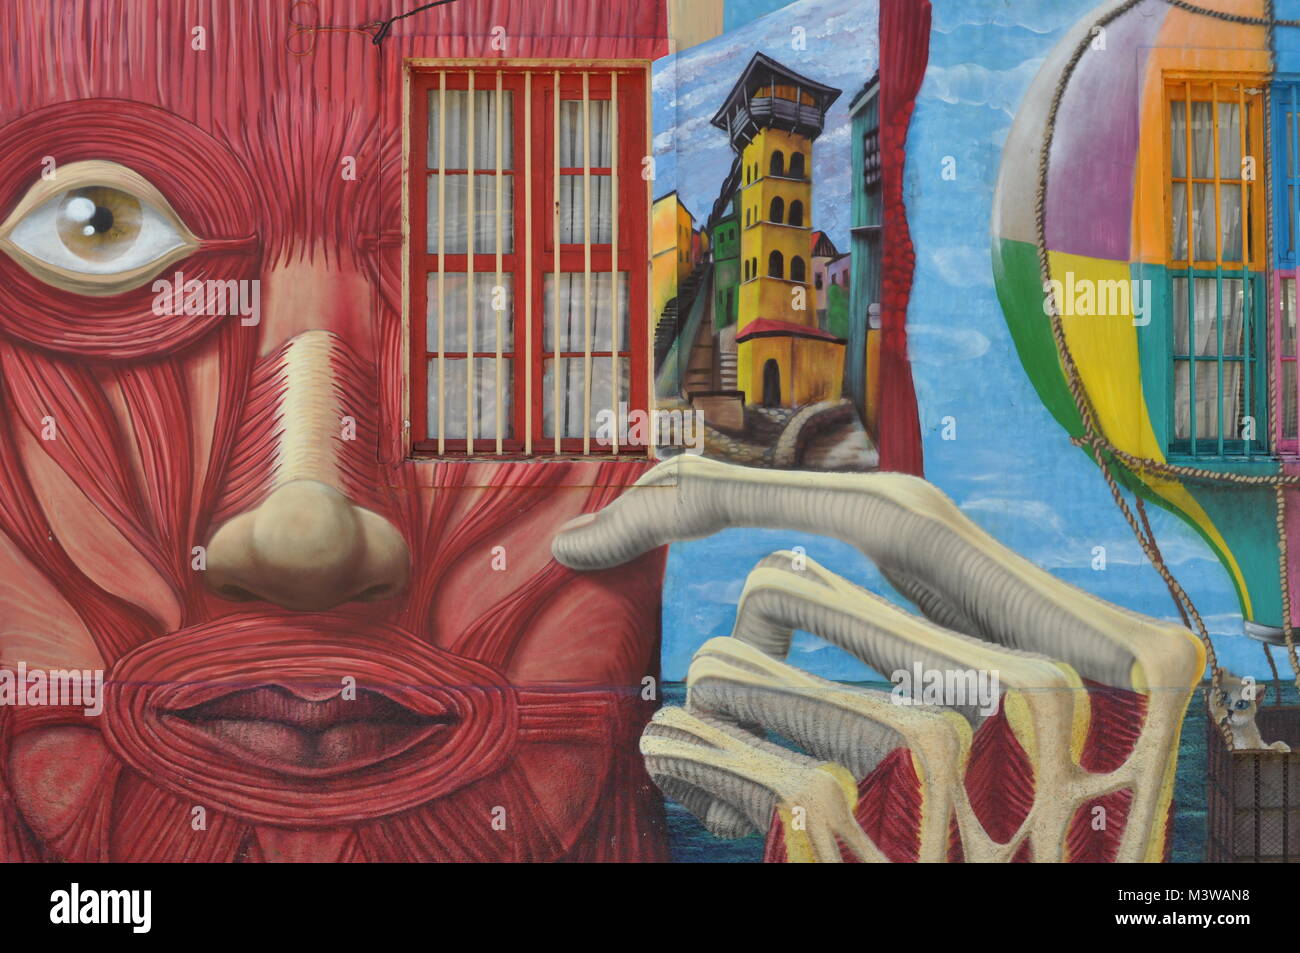 A mural of a person without skin painted on the side of a house in Valparaiso, Chile Stock Photo